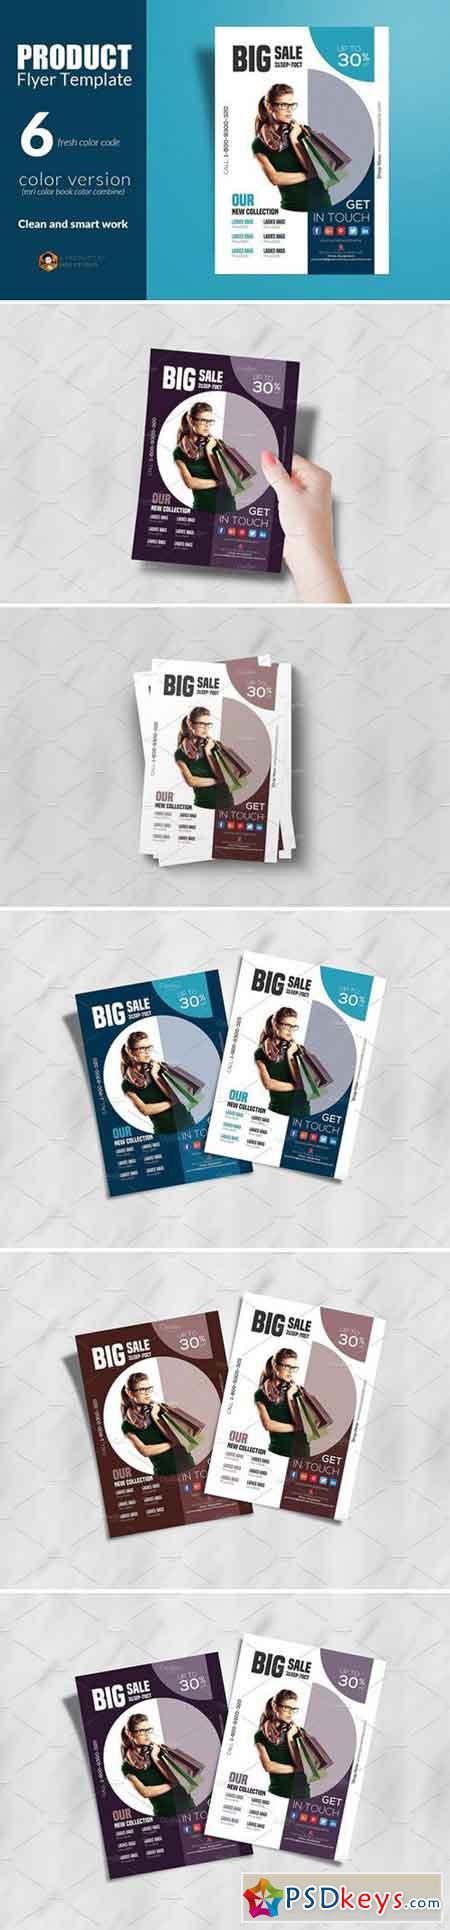 Product Flyer Template 1868879